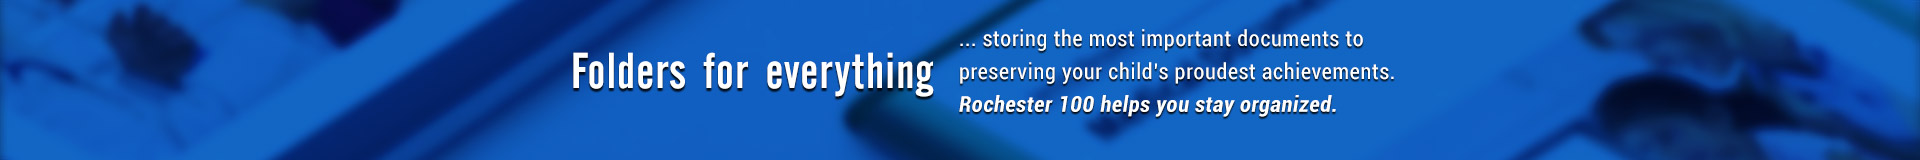 Nicky's Other Products Storing the most important documents to preserving your child's proudest achievemets. Rochester 100 helps you stay organized.